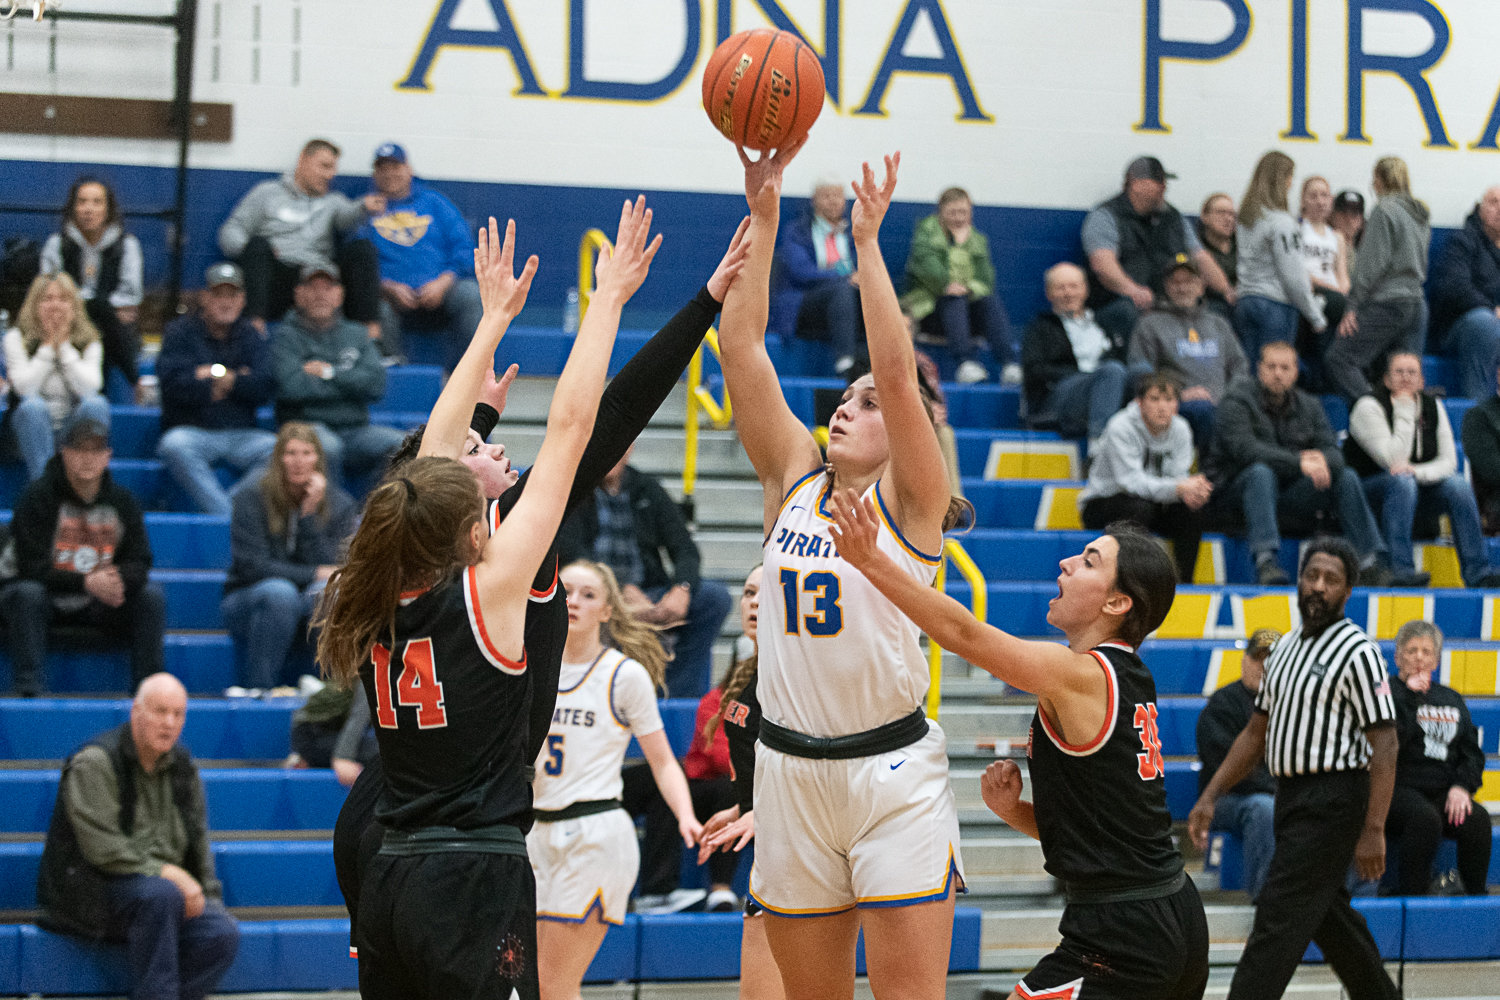 Karlee VonMoos puts up a shot against three defenders during Adna's 51-47 win over Rainier on Jan. 19.